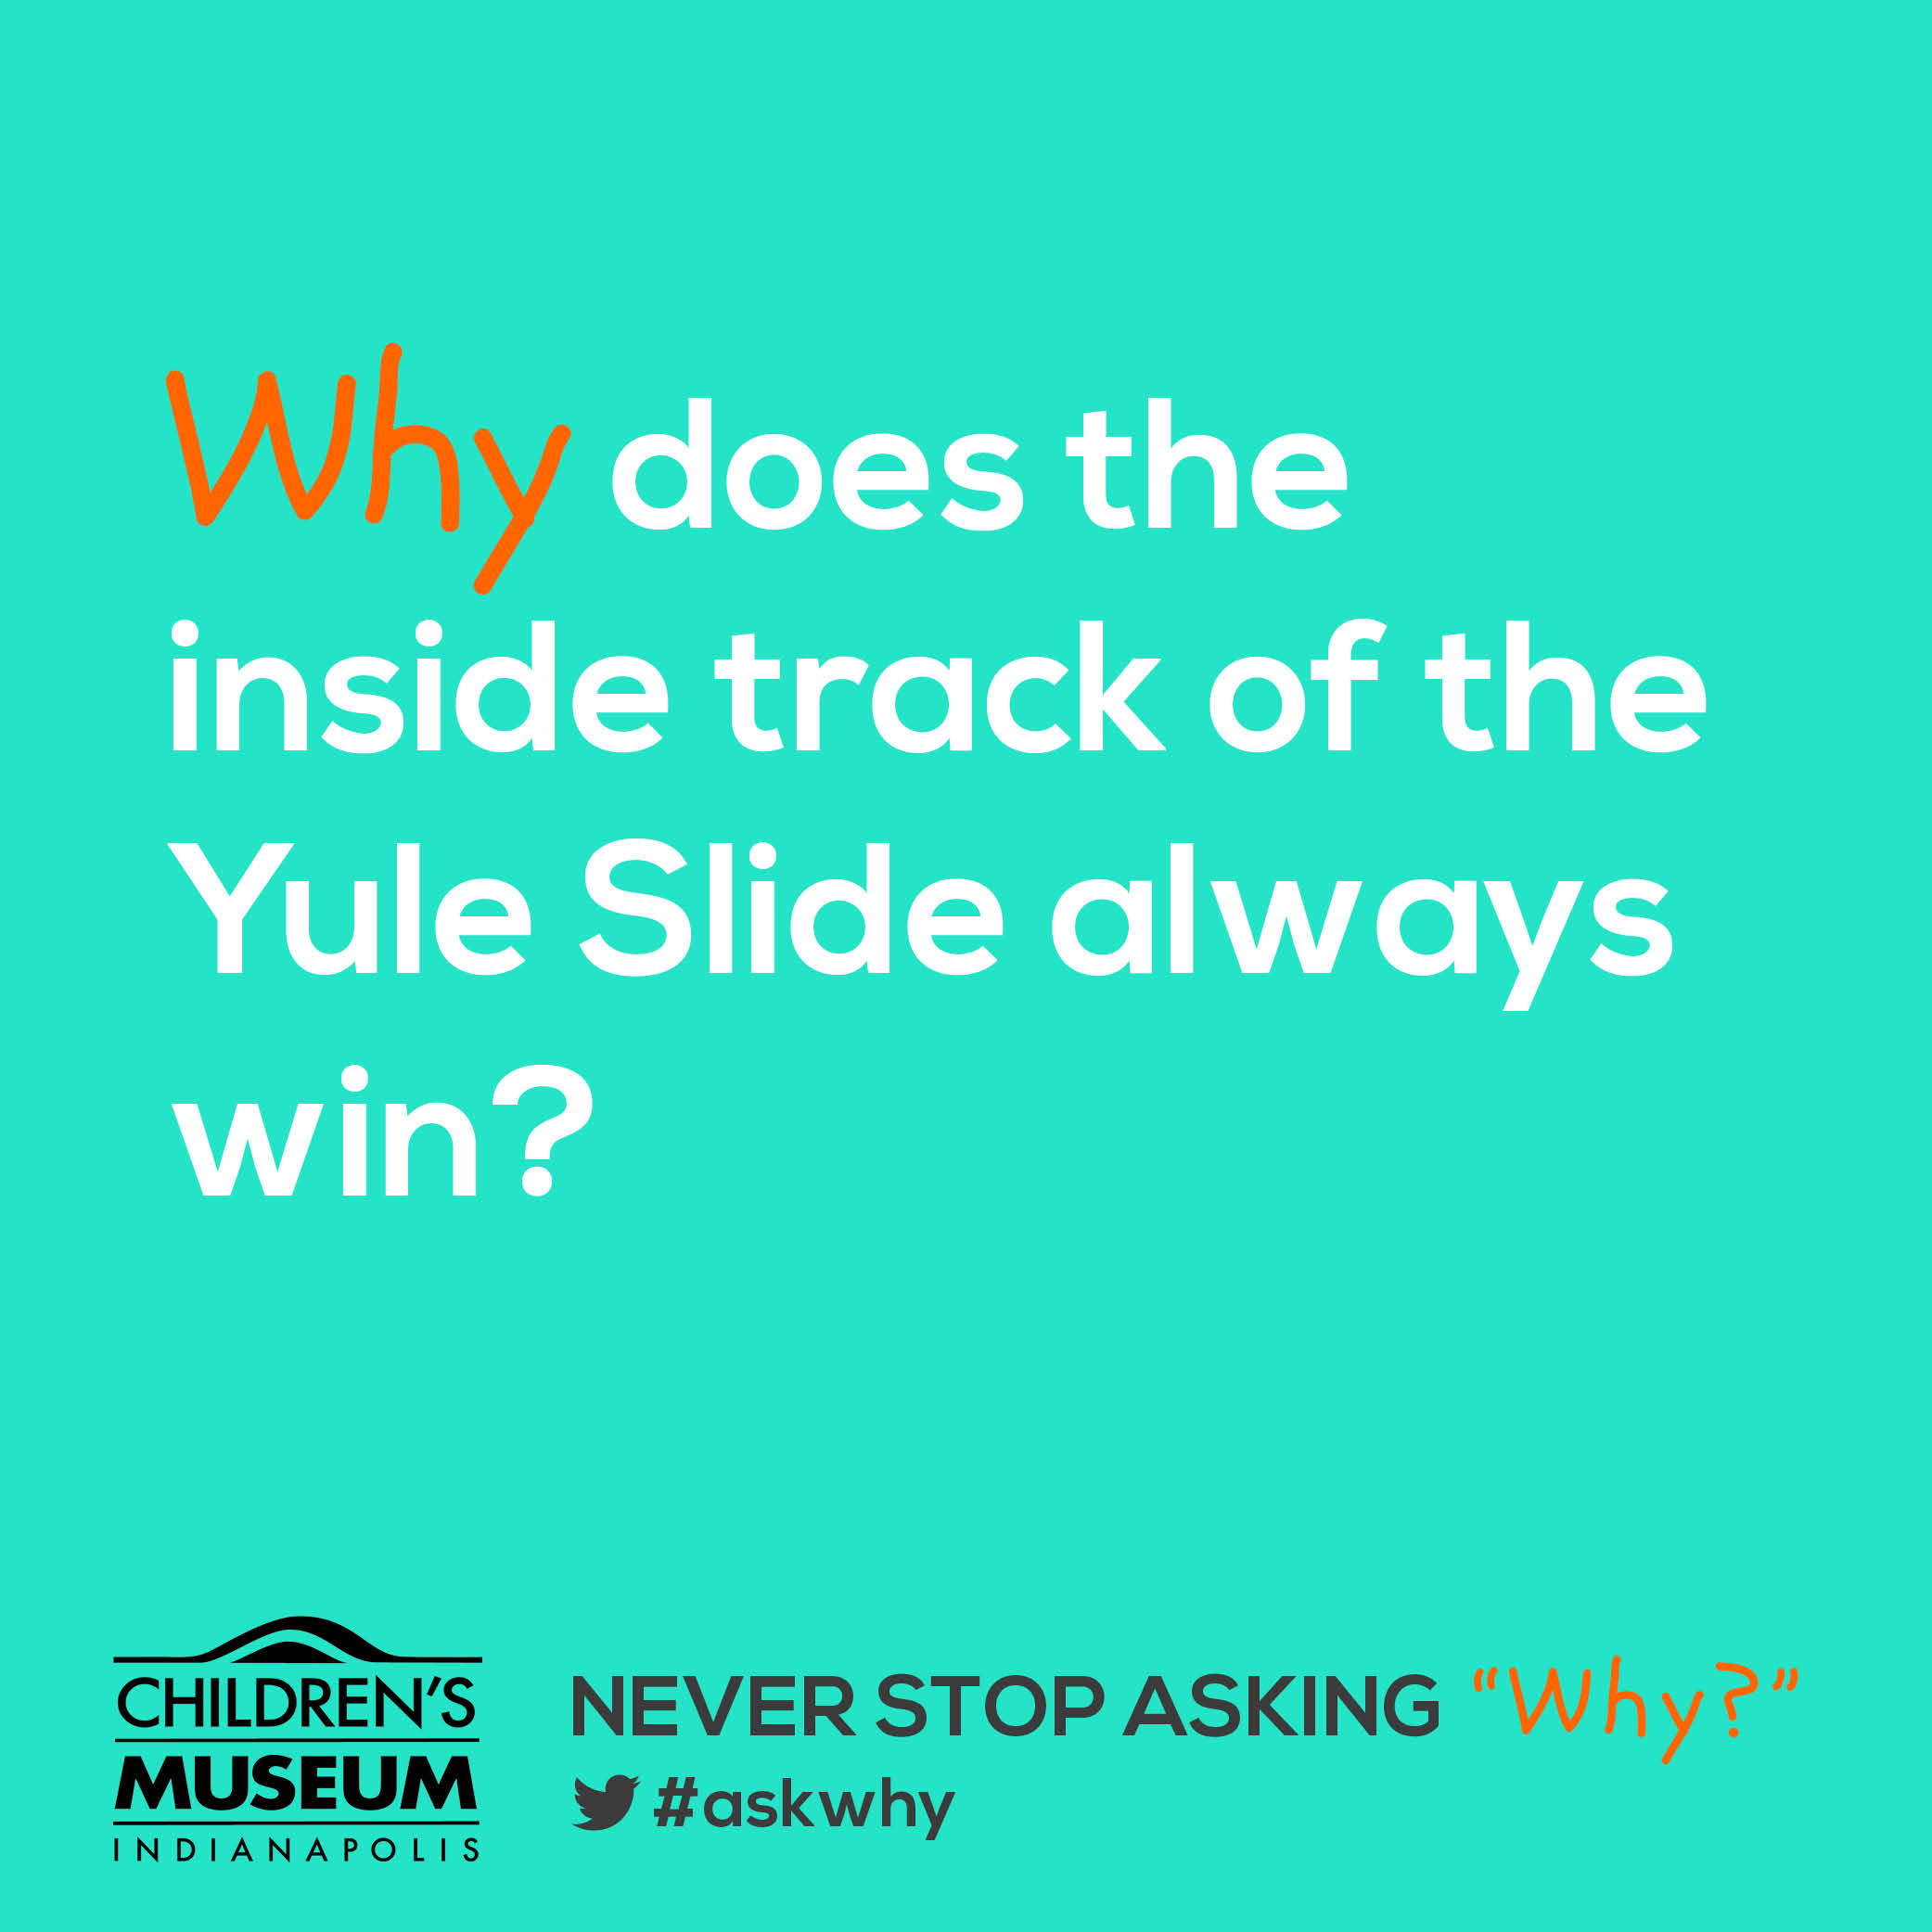 Why Does the Inside Track of the Yule Slide Always Win?